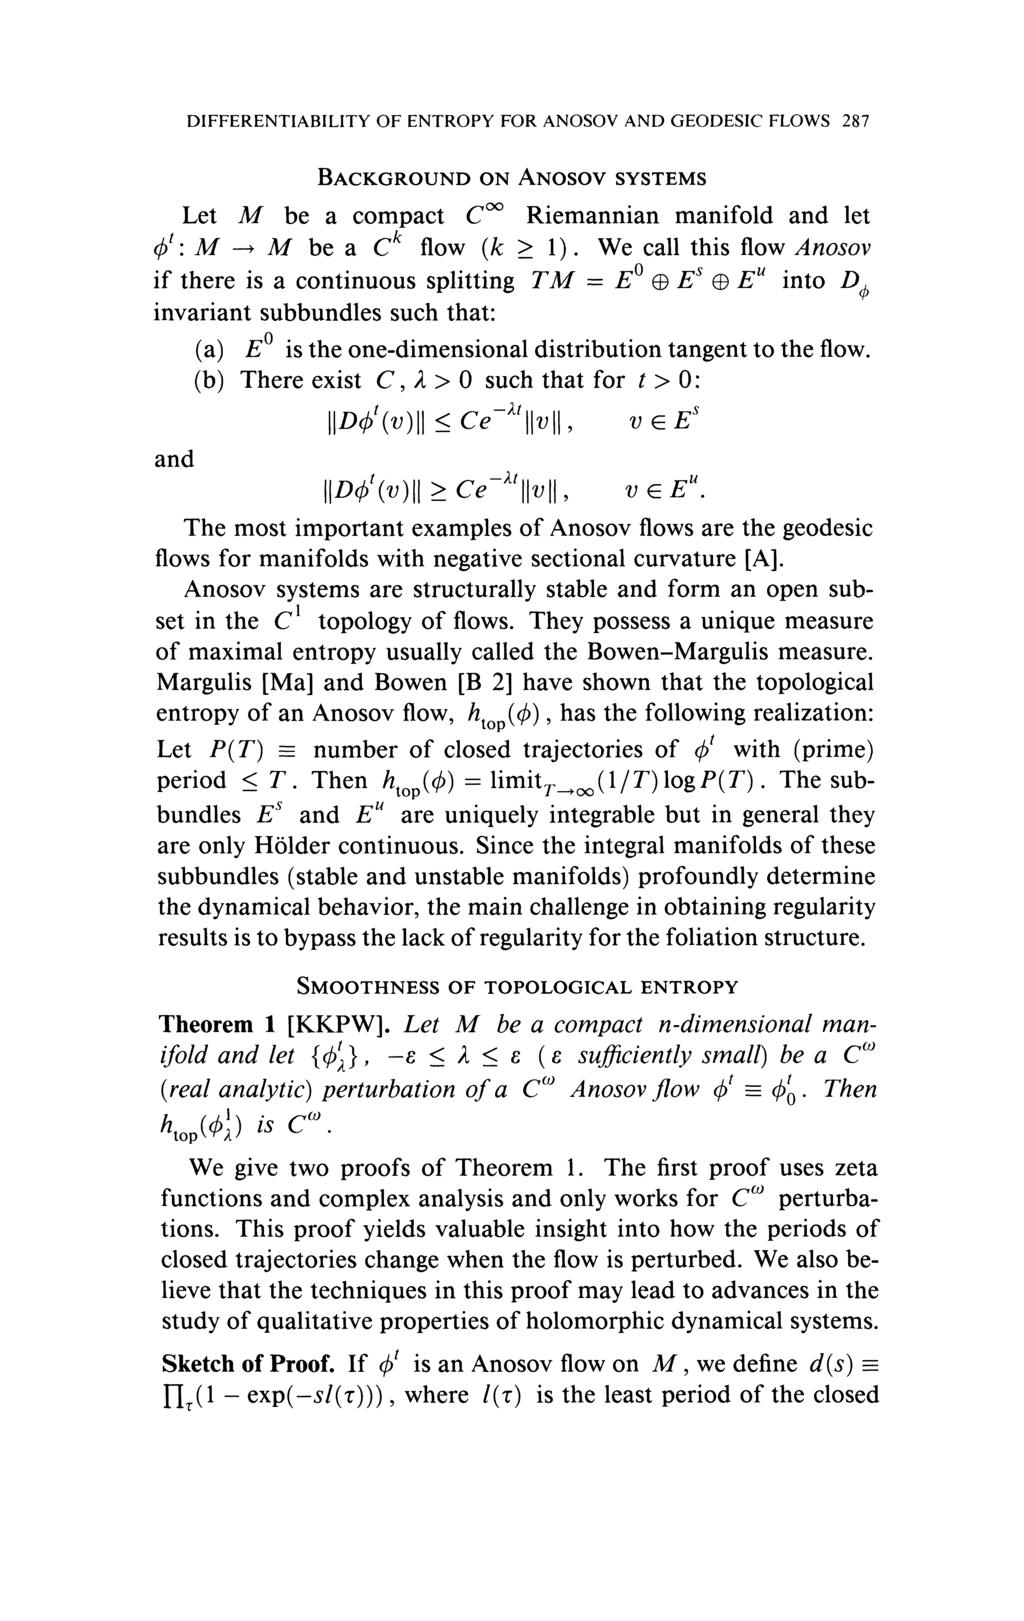 DIFFERENTIABILITY OF ENTROPY FOR ANOSOV AND GEODESIC FLOWS 287 BACKGROUND ON ANOSOV SYSTEMS Let M be a compact C Riemannian manifold and let 0': M -+ M be a C^ flow (k > 1).